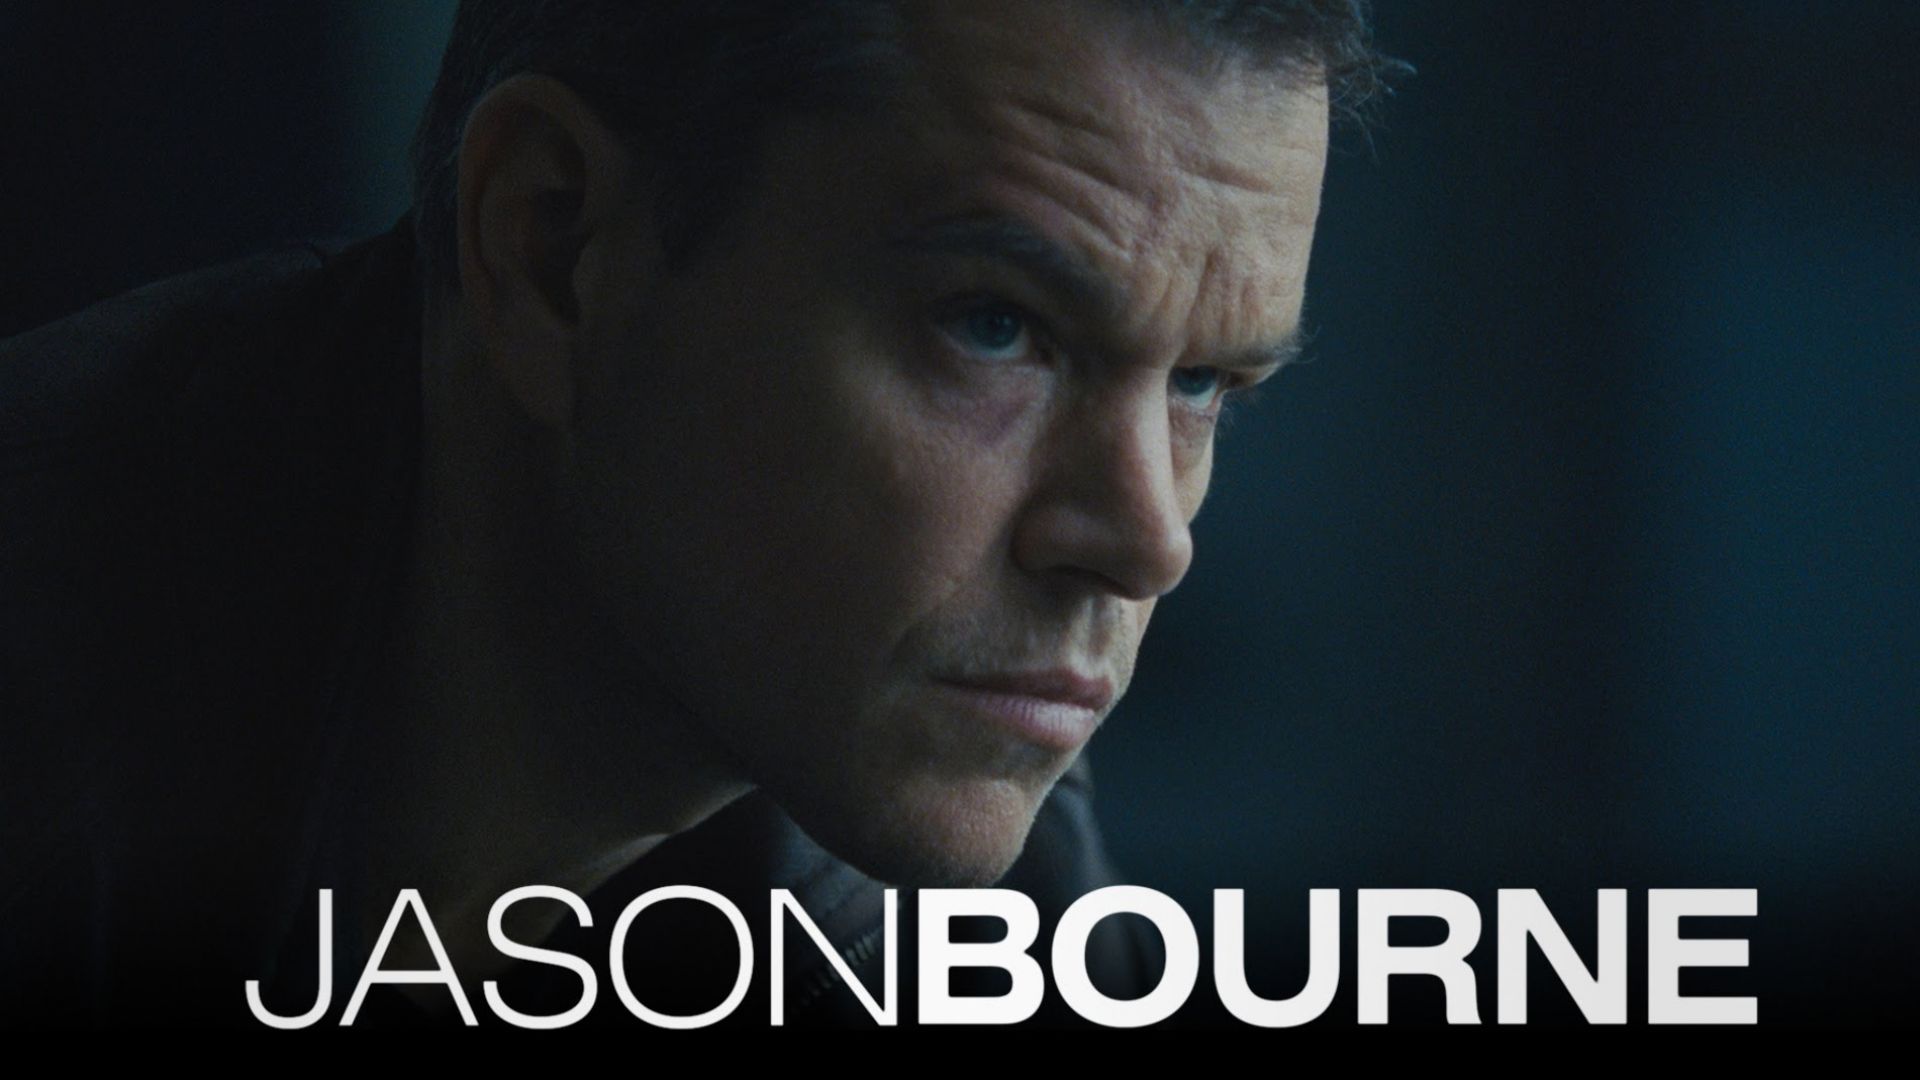 Bourne is back in first look Super Bowl spot; Film officiall